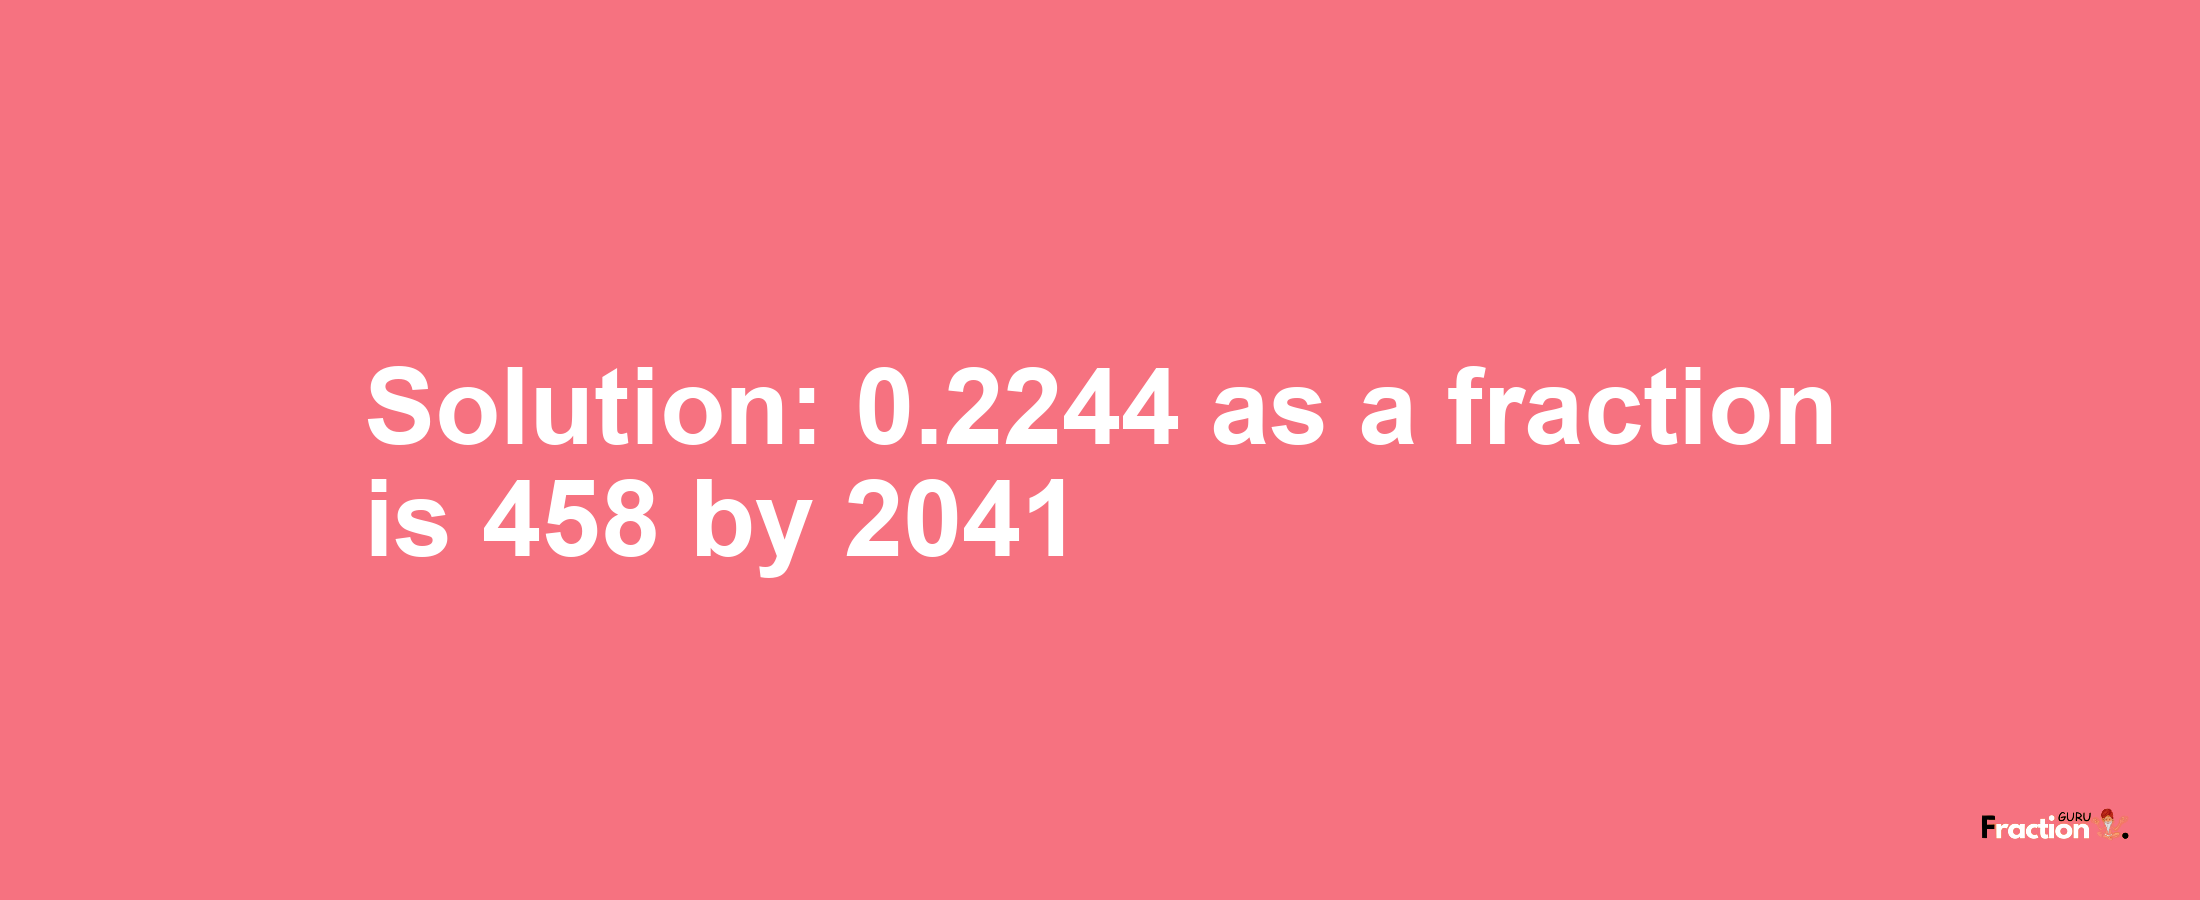 Solution:0.2244 as a fraction is 458/2041